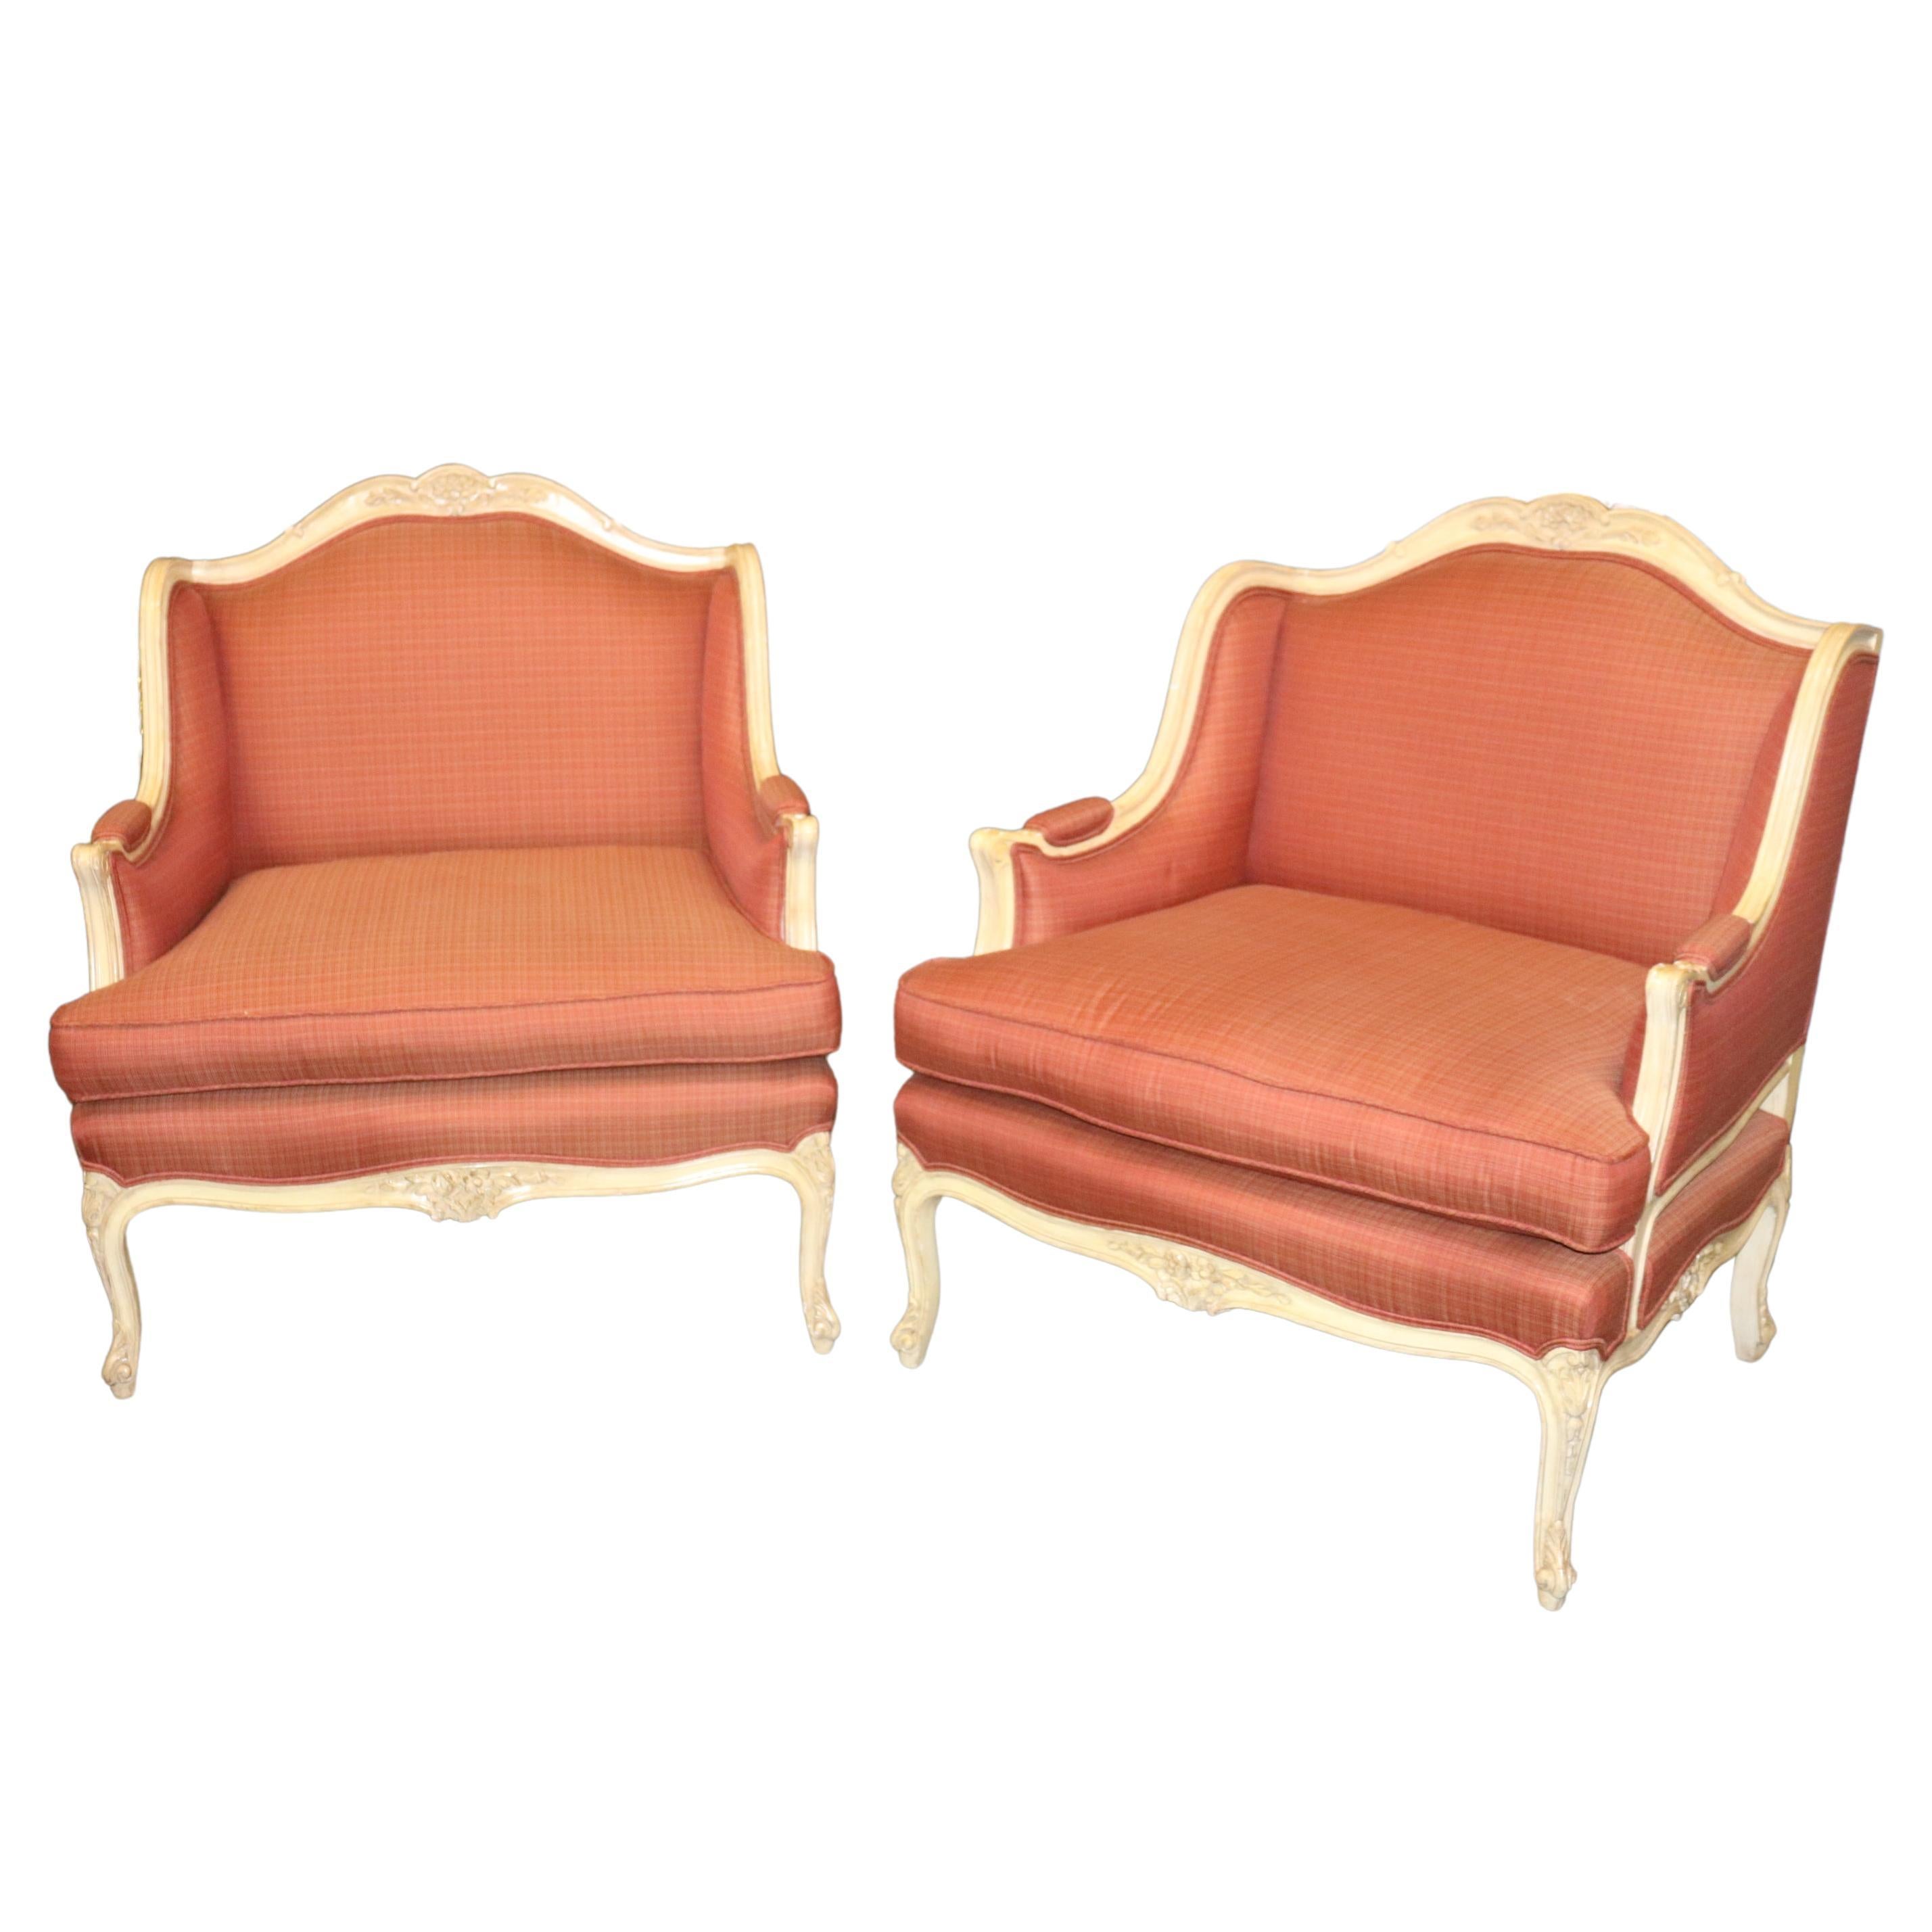 Exceptional Pair of French Louis XV Painted Decorated Wide Bergere Chairs